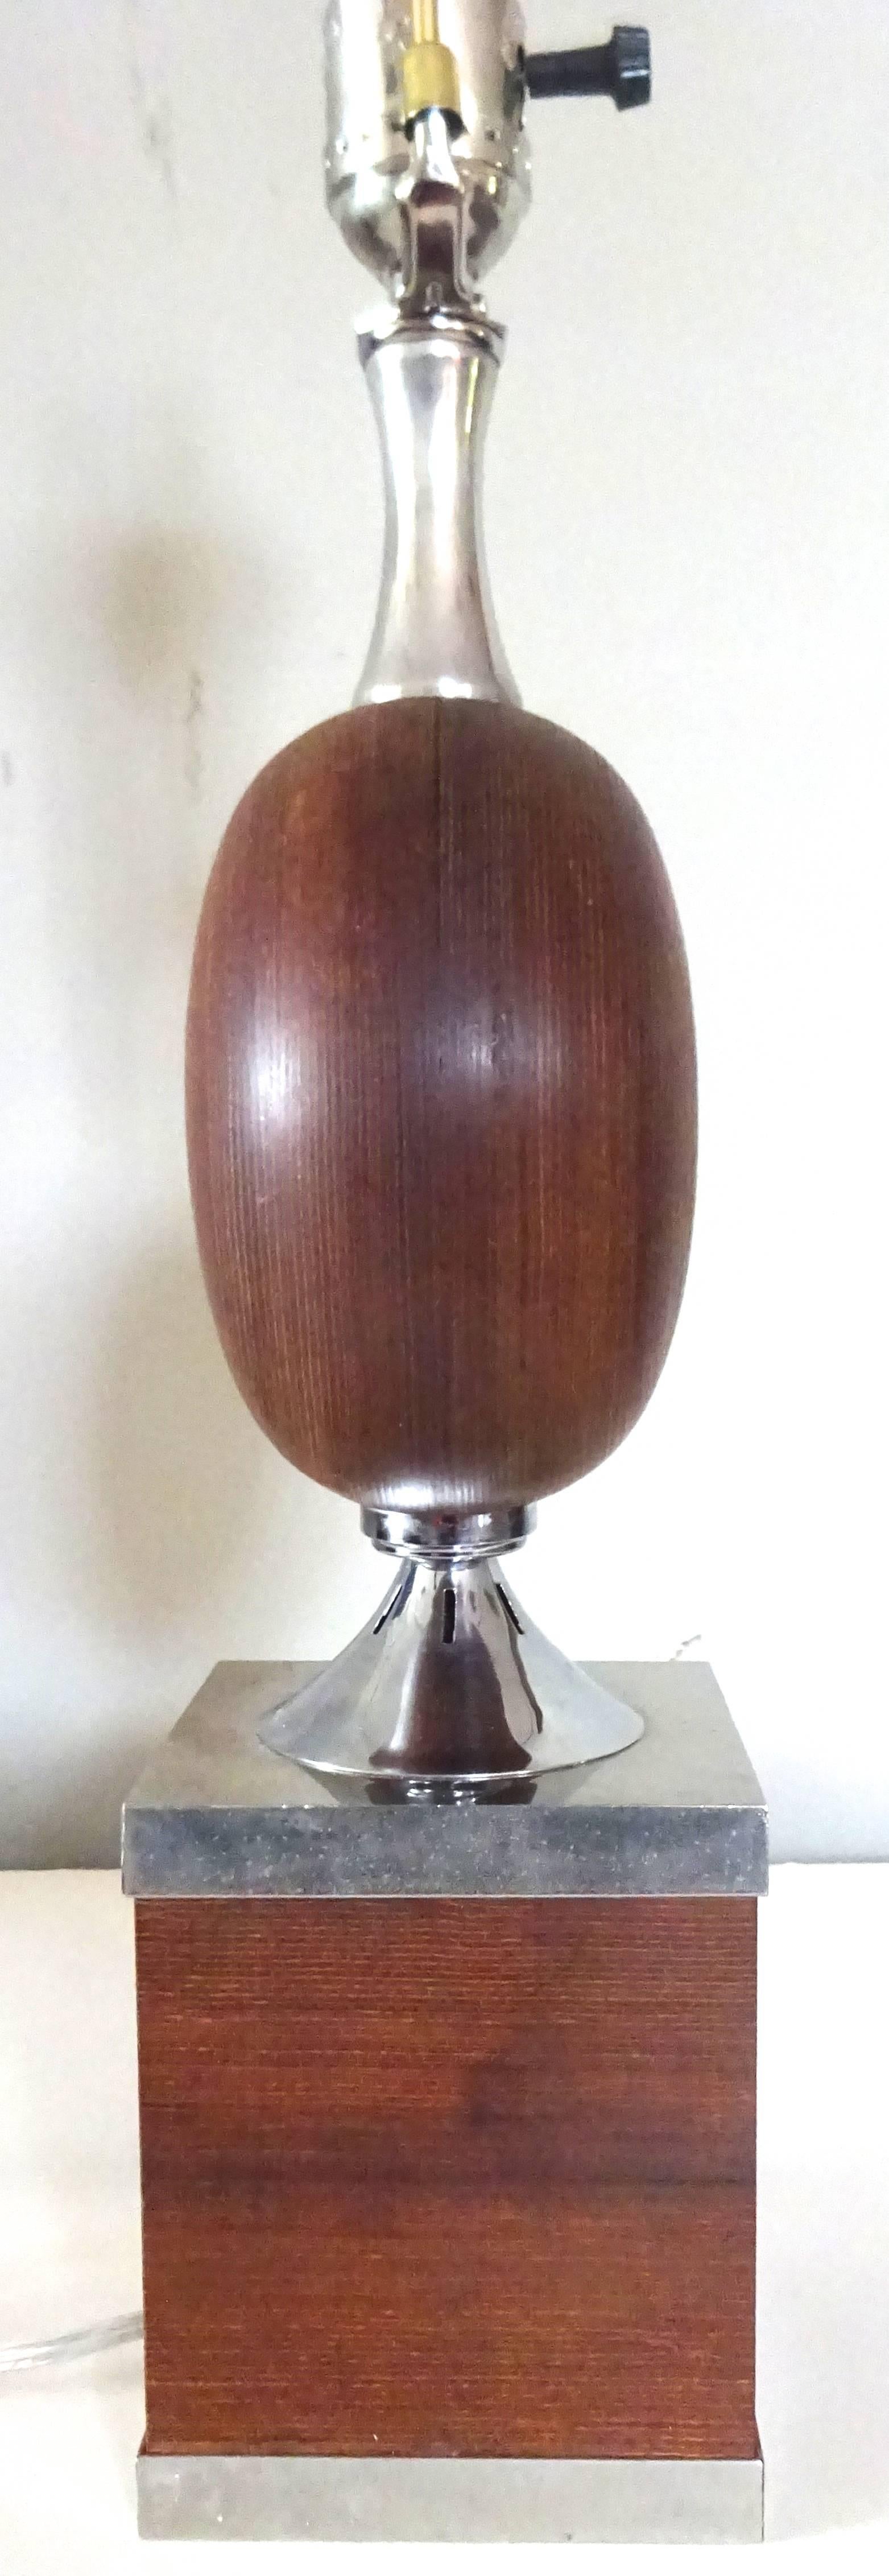 Rare 1970s French Maison Barbier Laminated Wood and Chrome Table Lamp For Sale 2